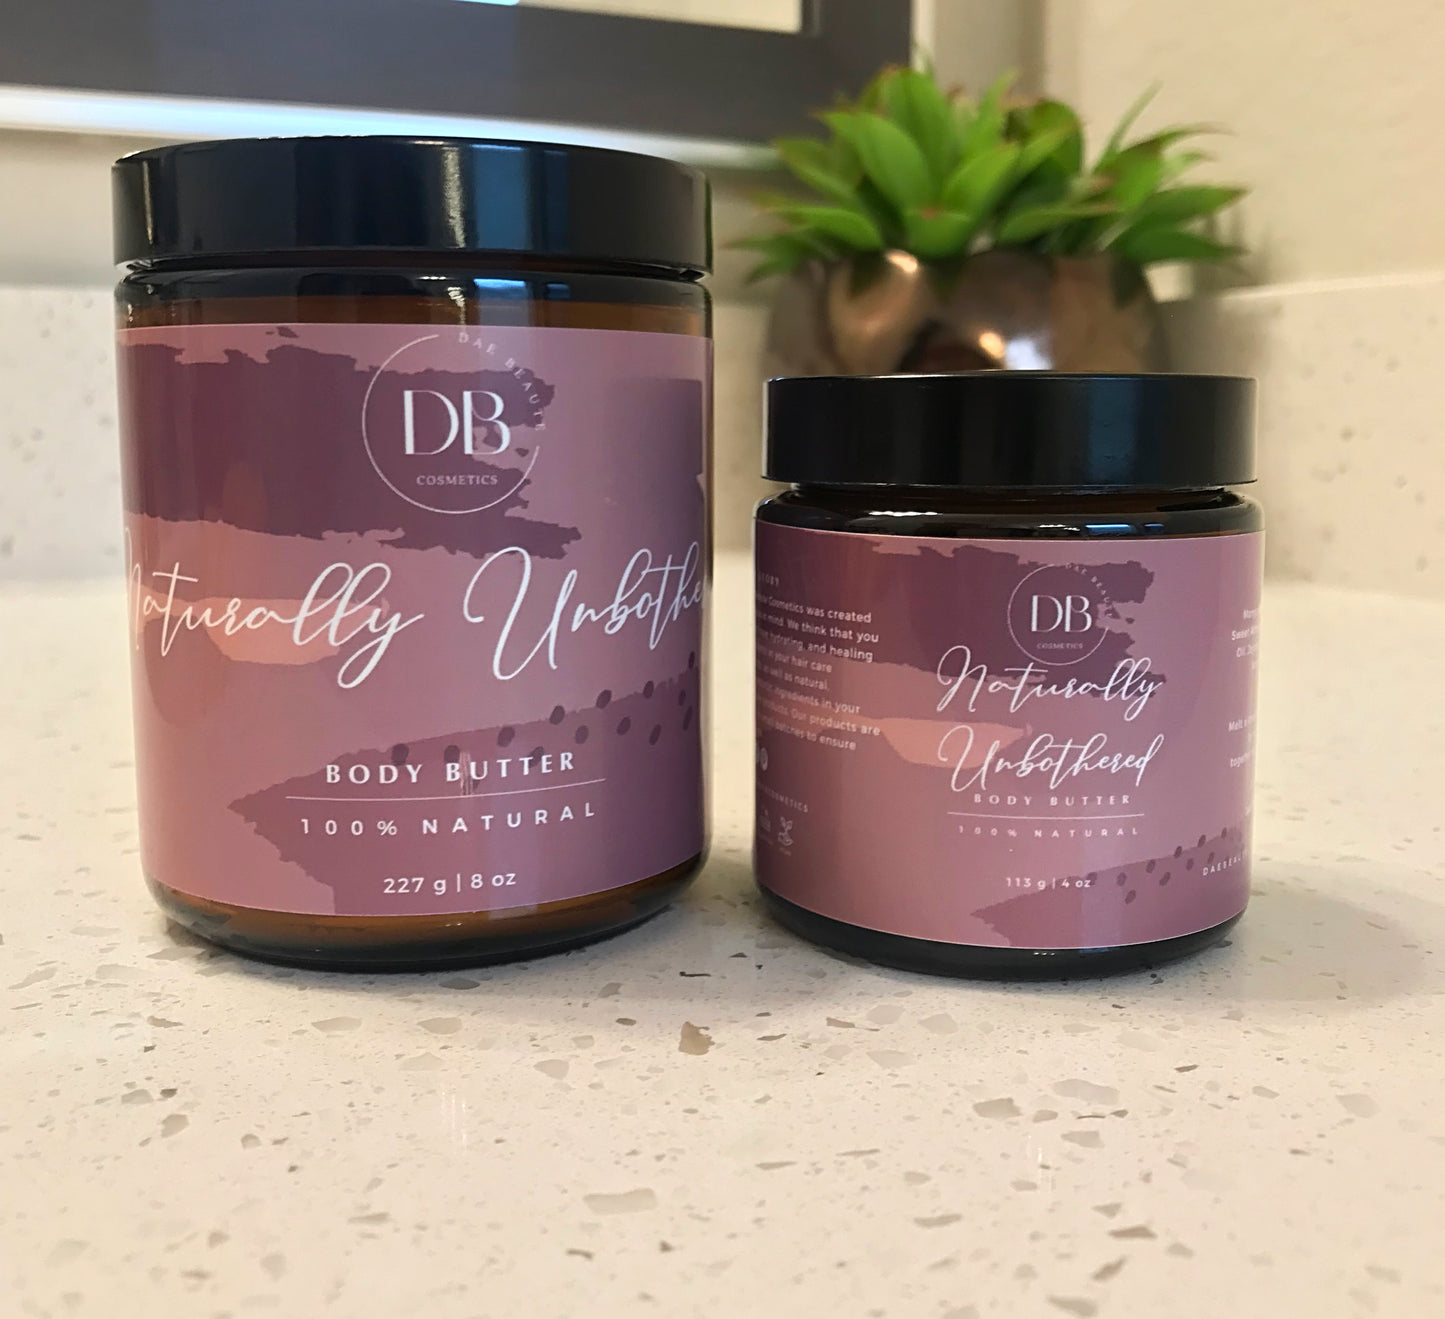 Whipped Naturally Unbothered Body Butter 4oz and 8oz